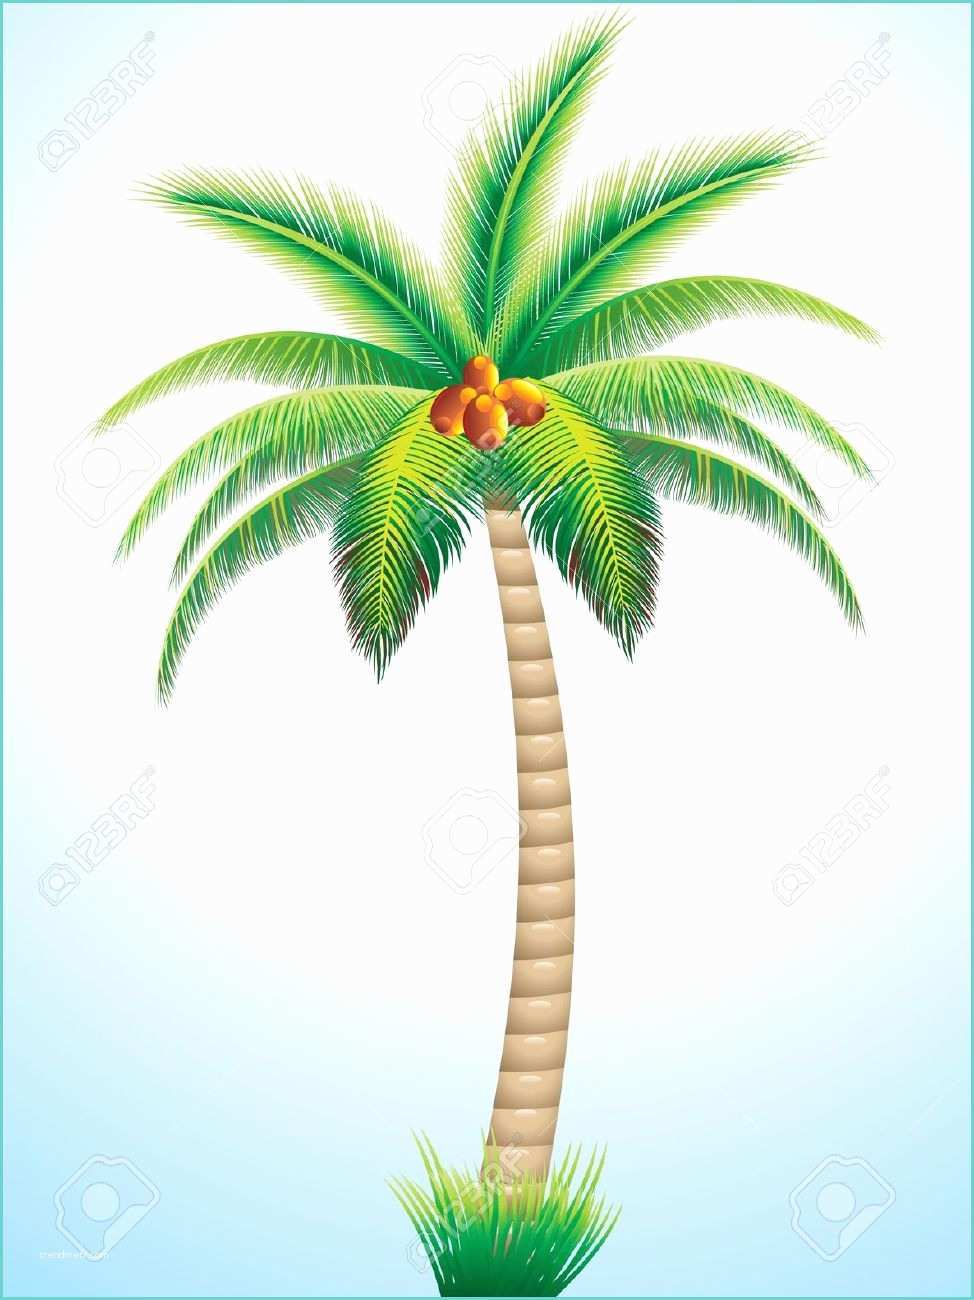 Coconut Tree Drawing Drawn Palm Tree Coconut Tree Pencil and In Color Drawn